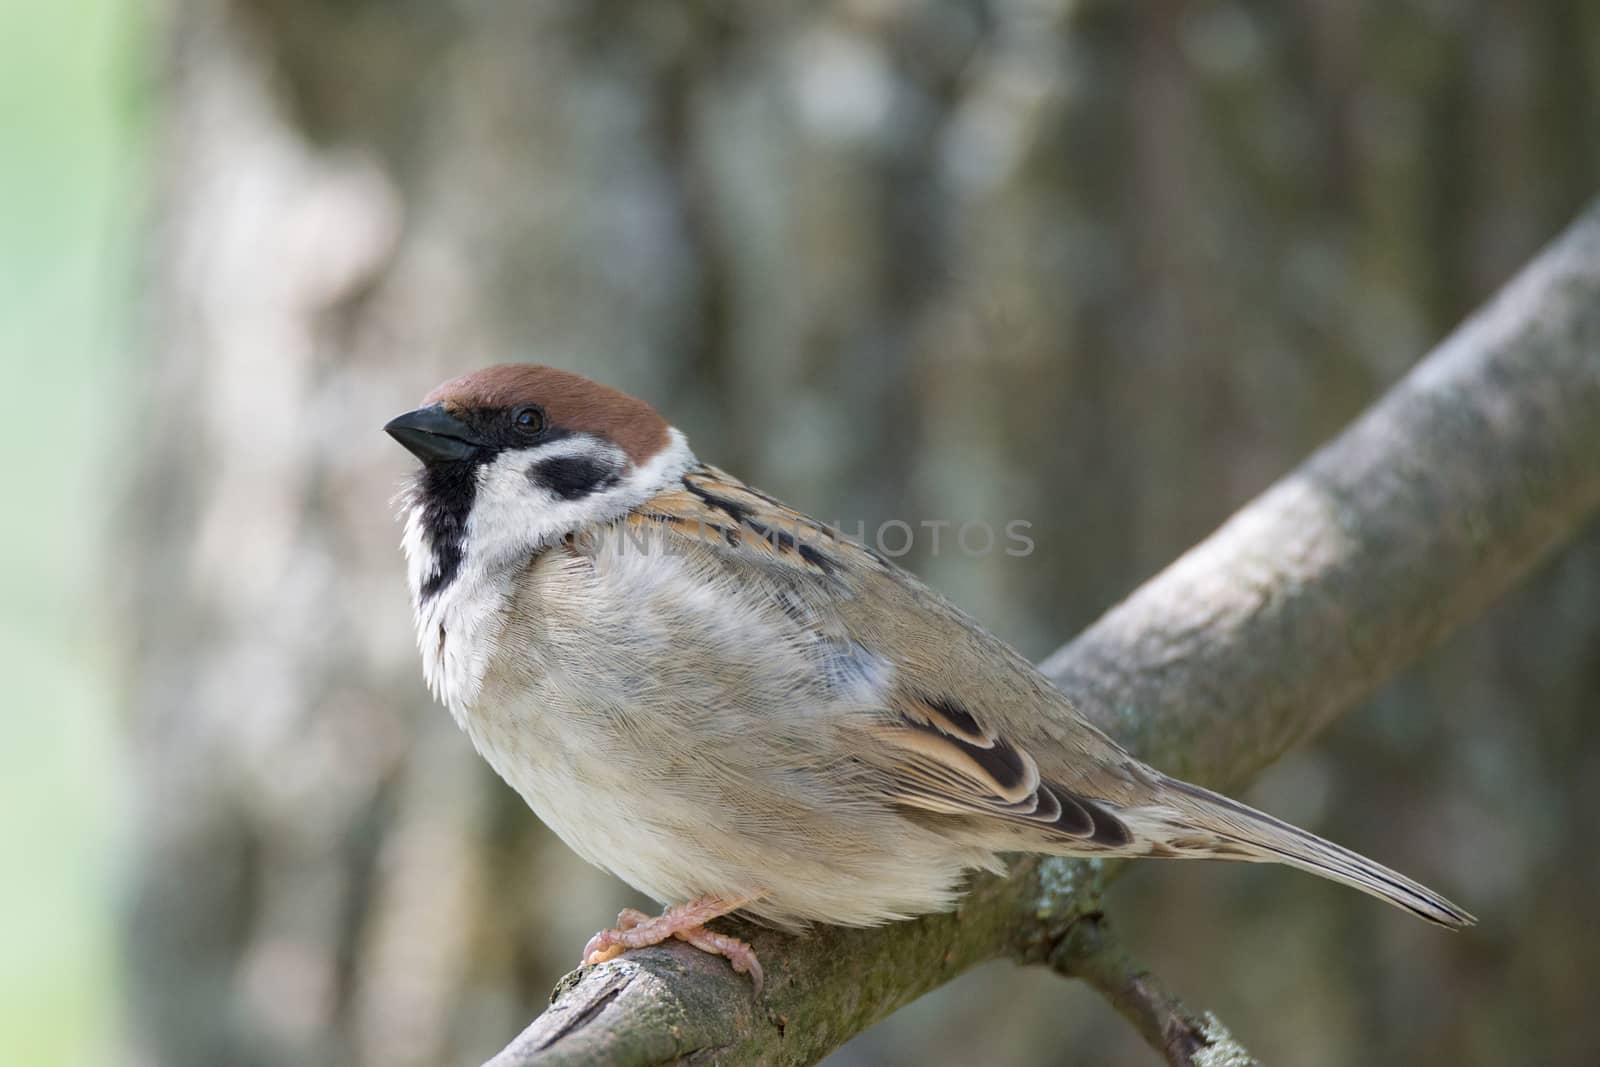 The photo shows a sparrow on a branch